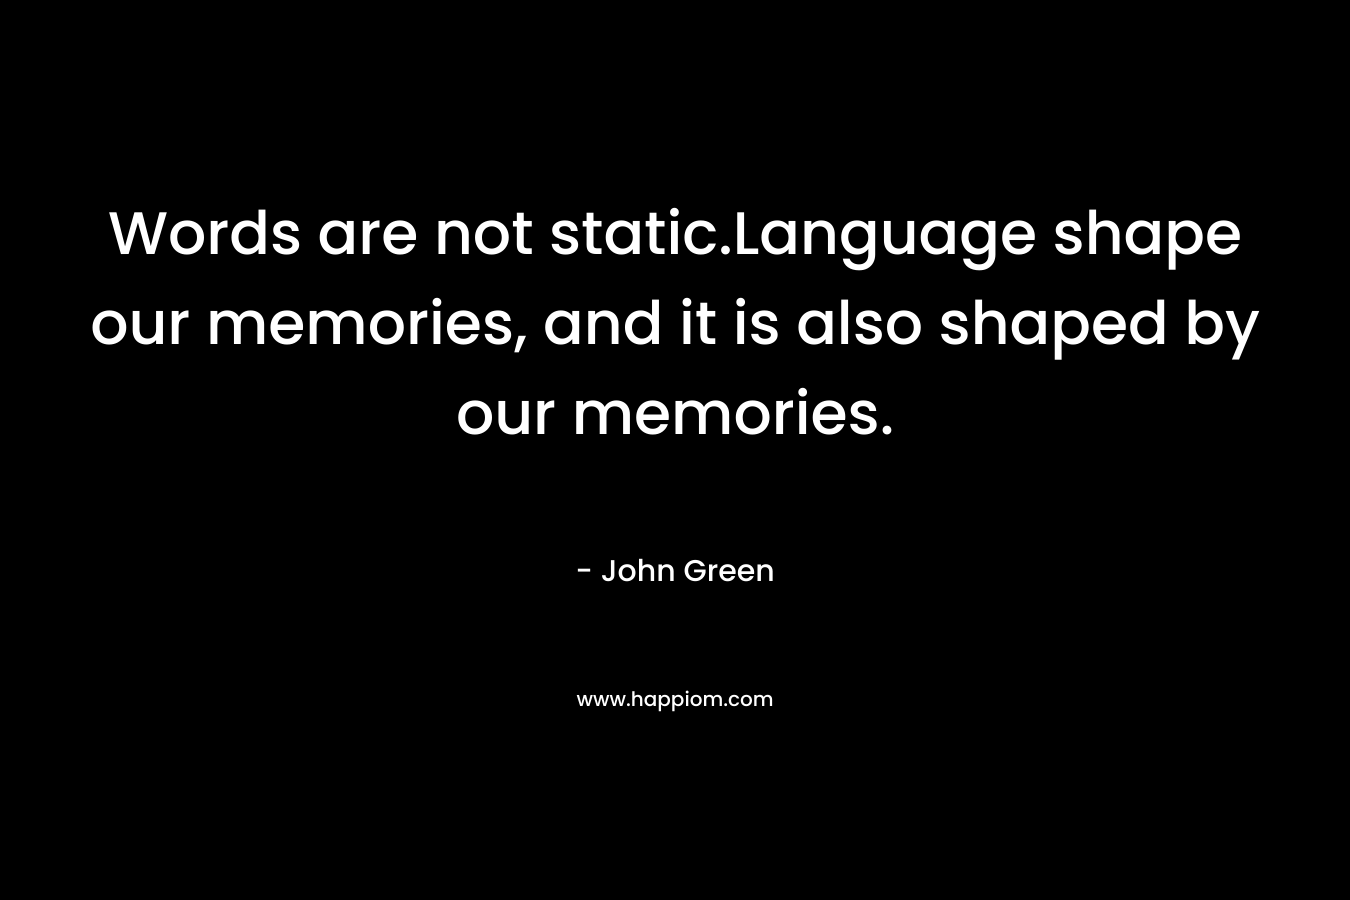 Words are not static.Language shape our memories, and it is also shaped by our memories.